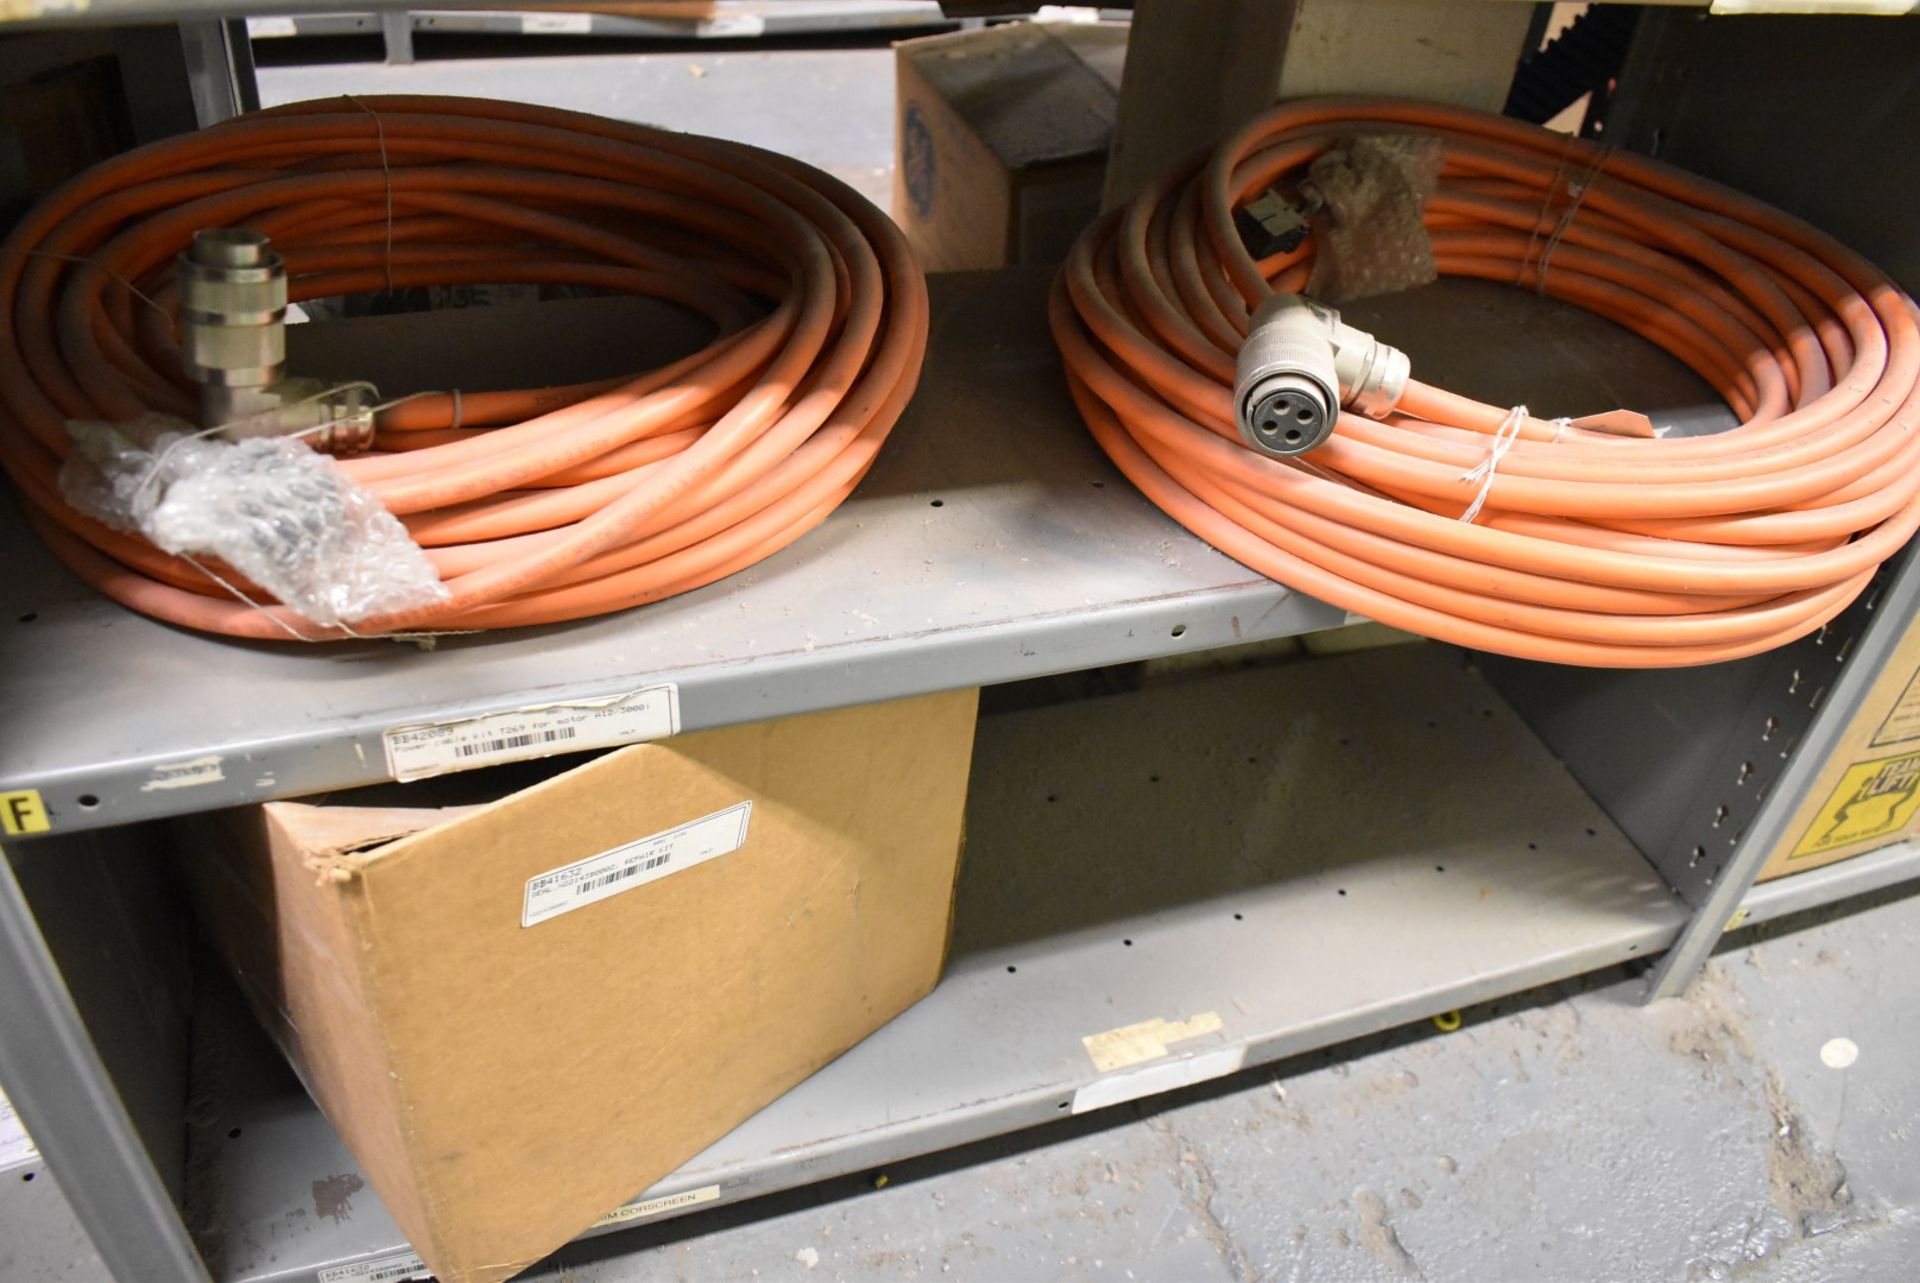 LOT/ CONTENTS OF SHELF - AUTOMATION CABLES, ROSEMOUNT 2" MAGNETIC FLOW METER, SPARE PARTS [RIGGING - Image 5 of 5